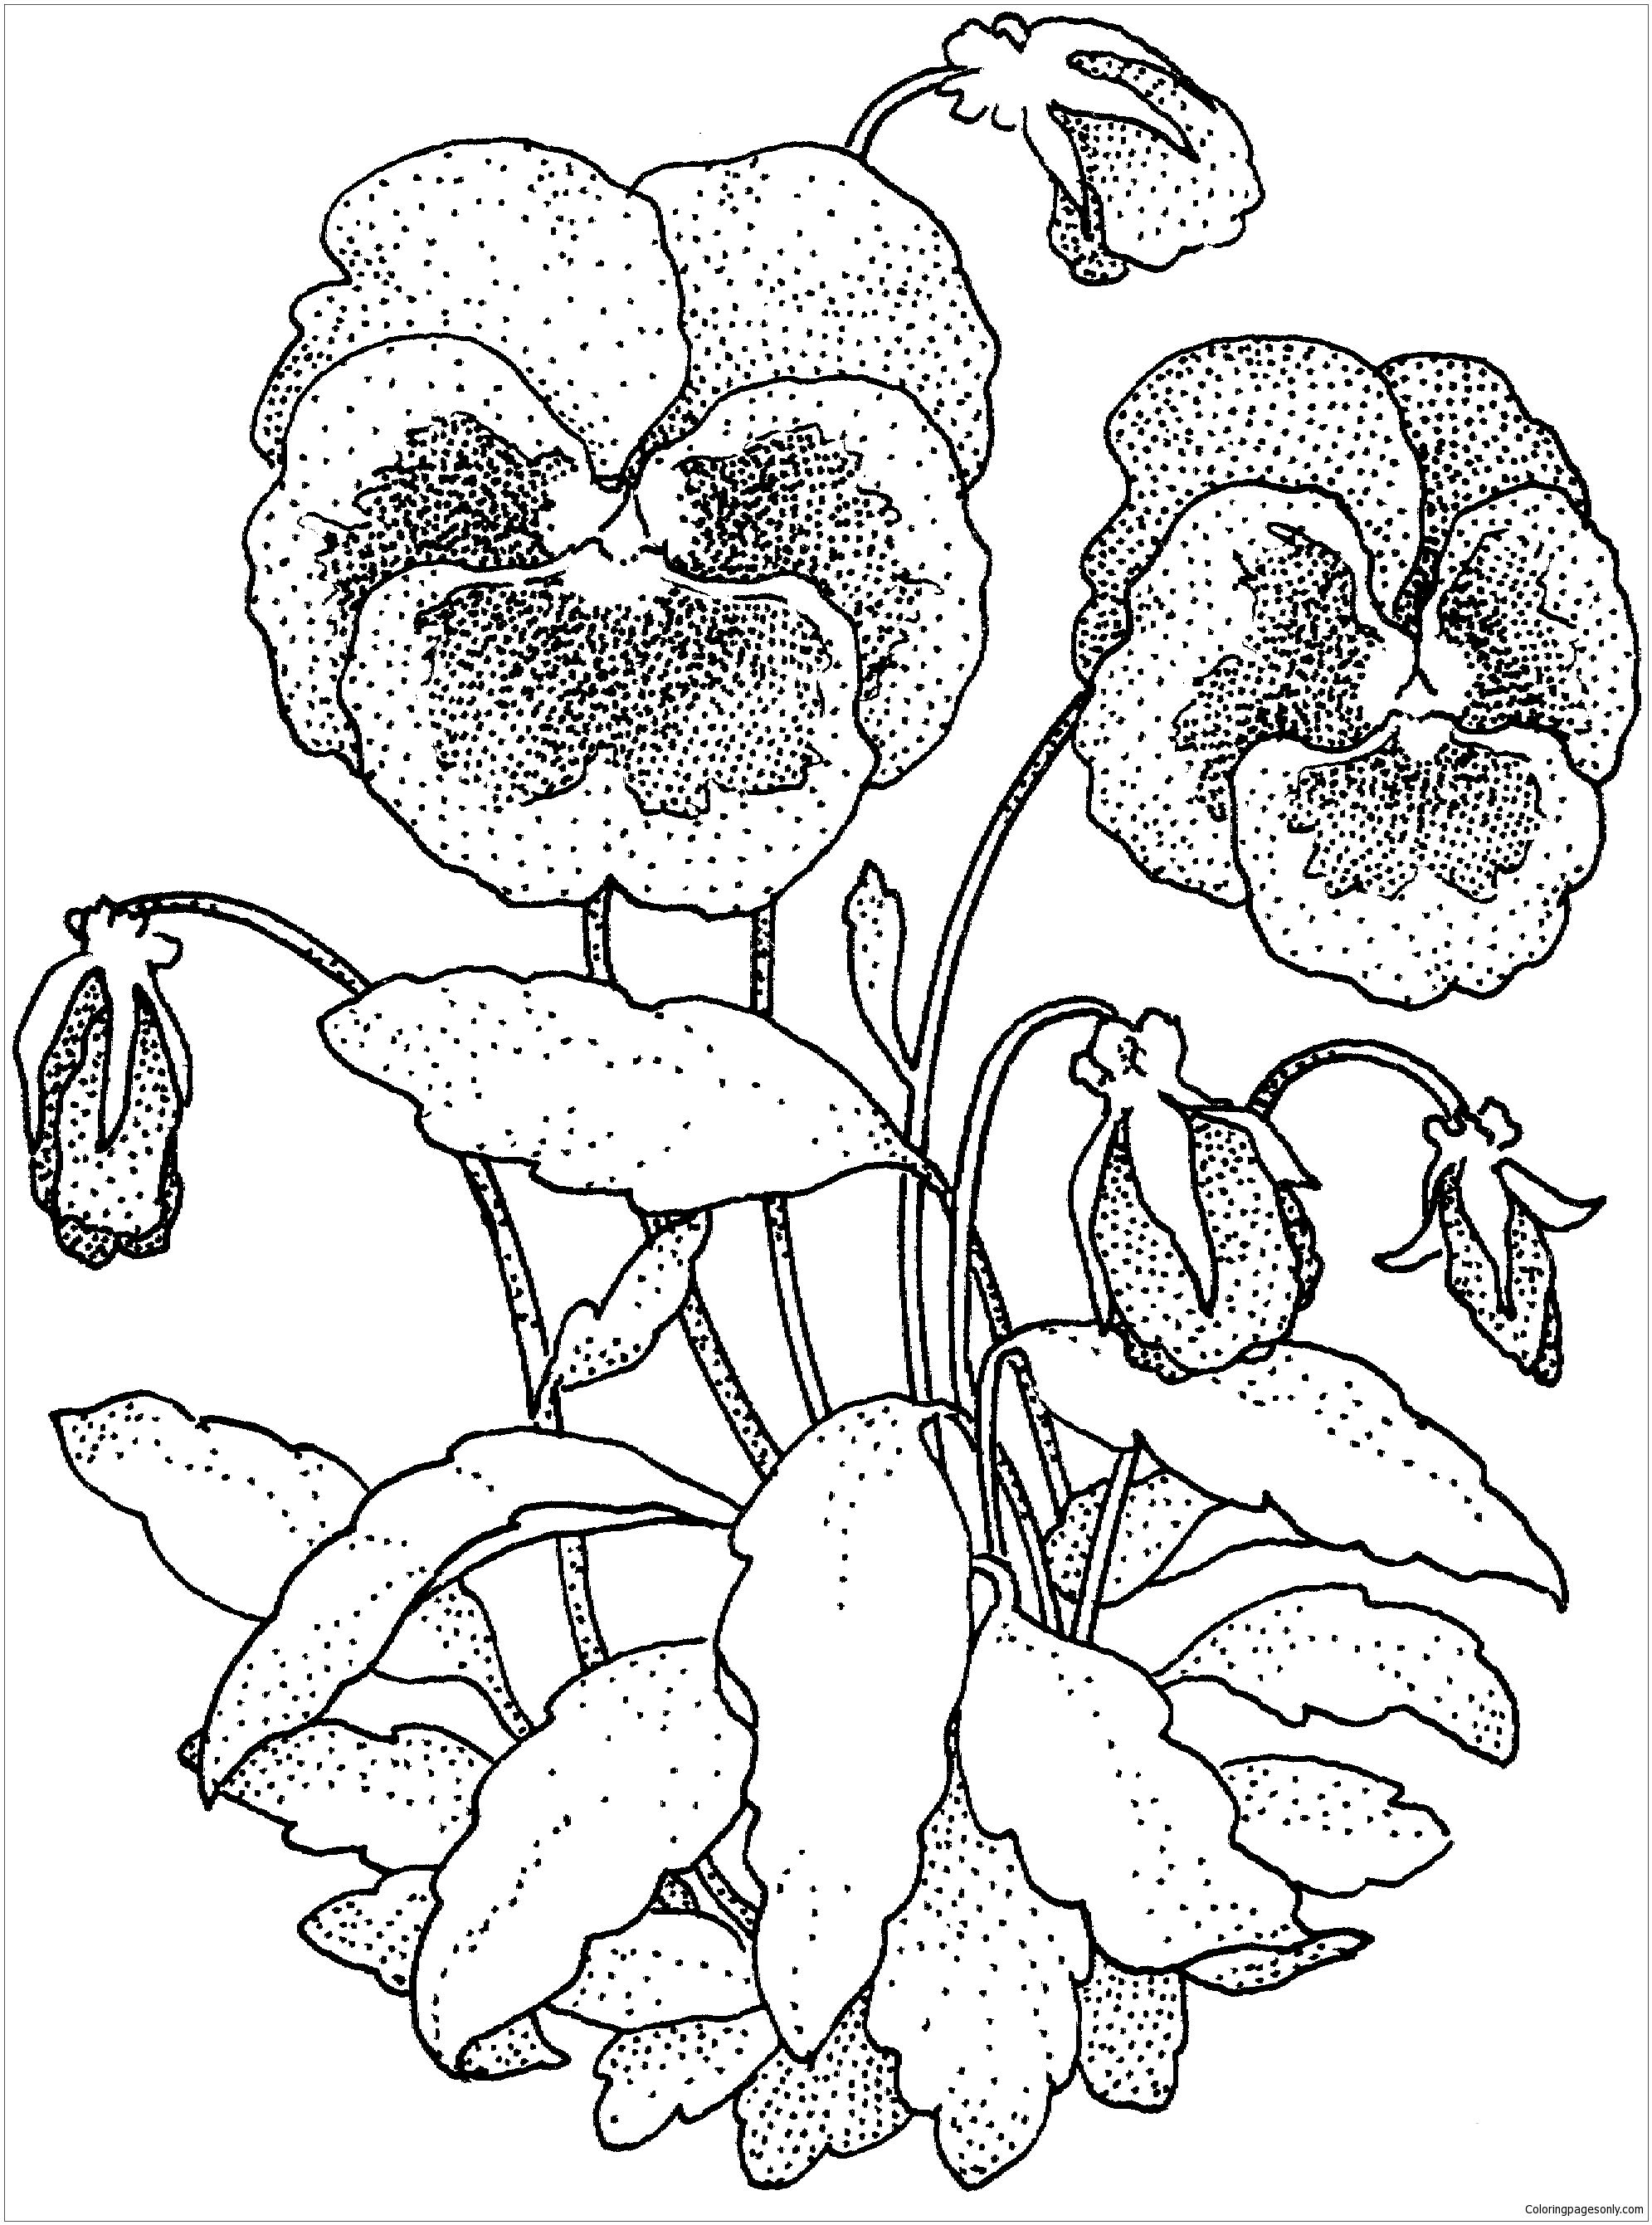 The Garden Pansy Coloring Page